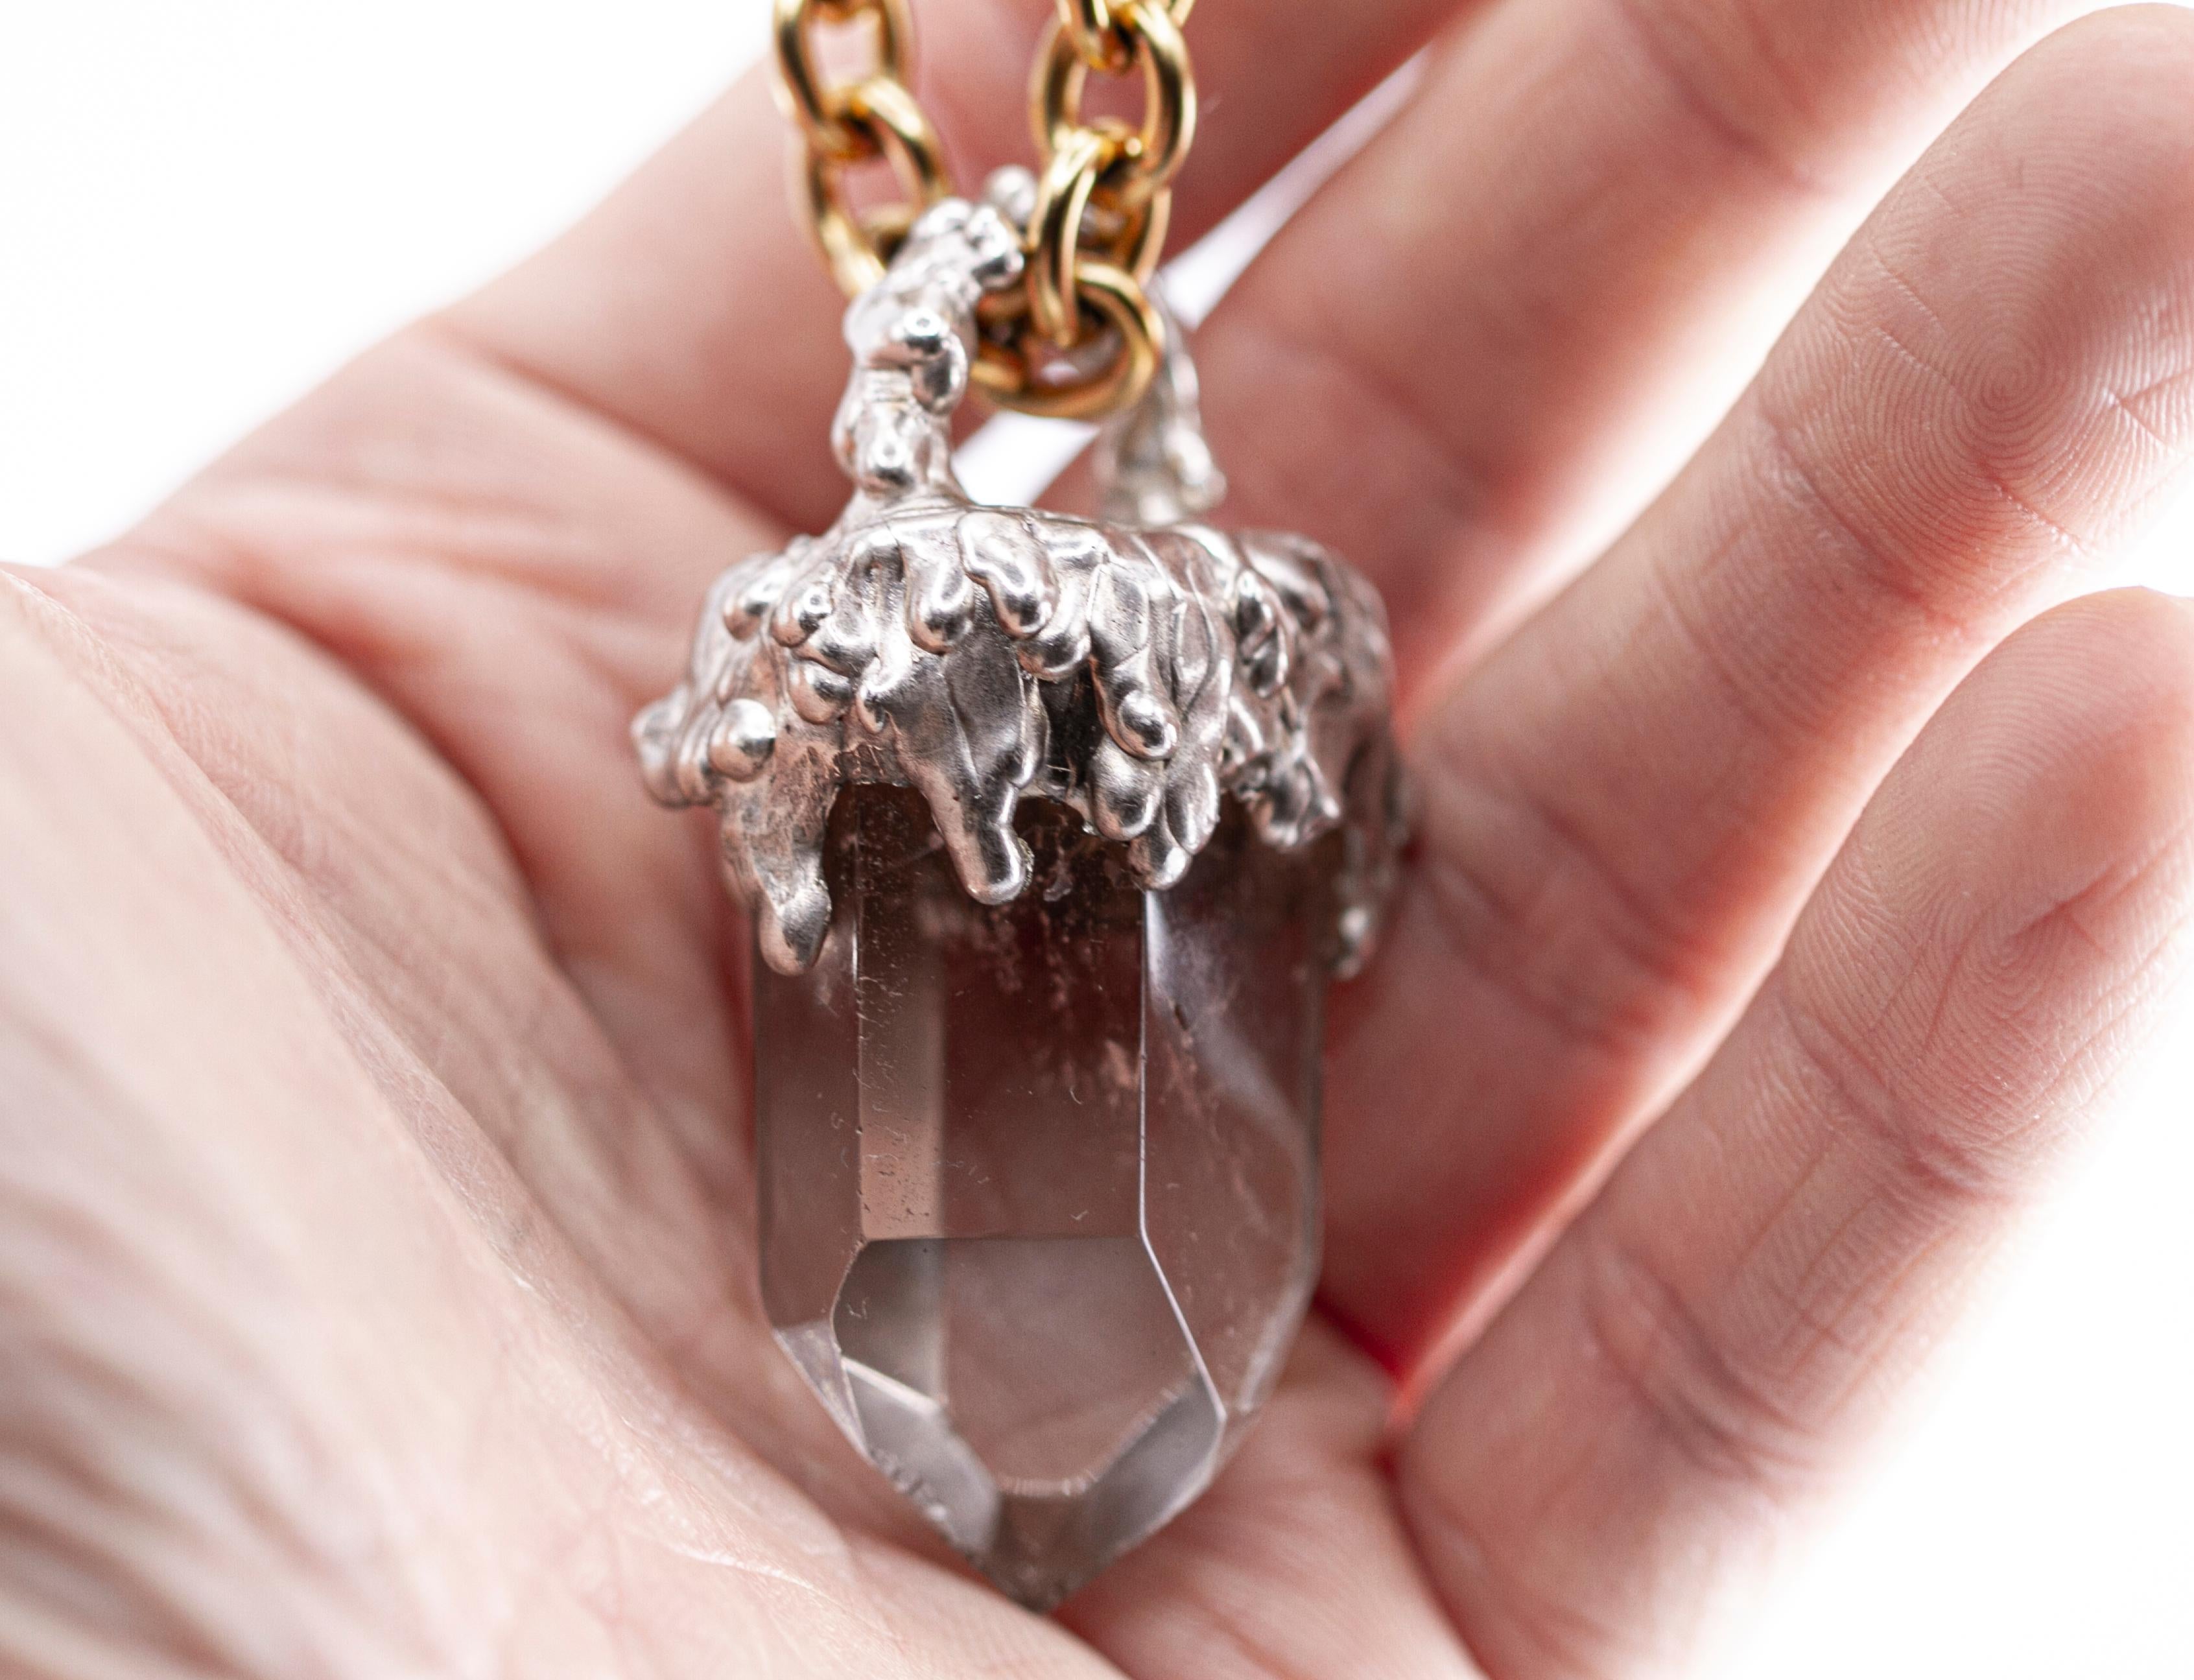 I think it's crystal clear. It is a very large hand carved silver amulet with a piece of raw quartz.

It's ice cream that melts on a block of ice.

This pendant is a one of a kind contemporary jewellery hand sculpted by the French jeweller Binliang